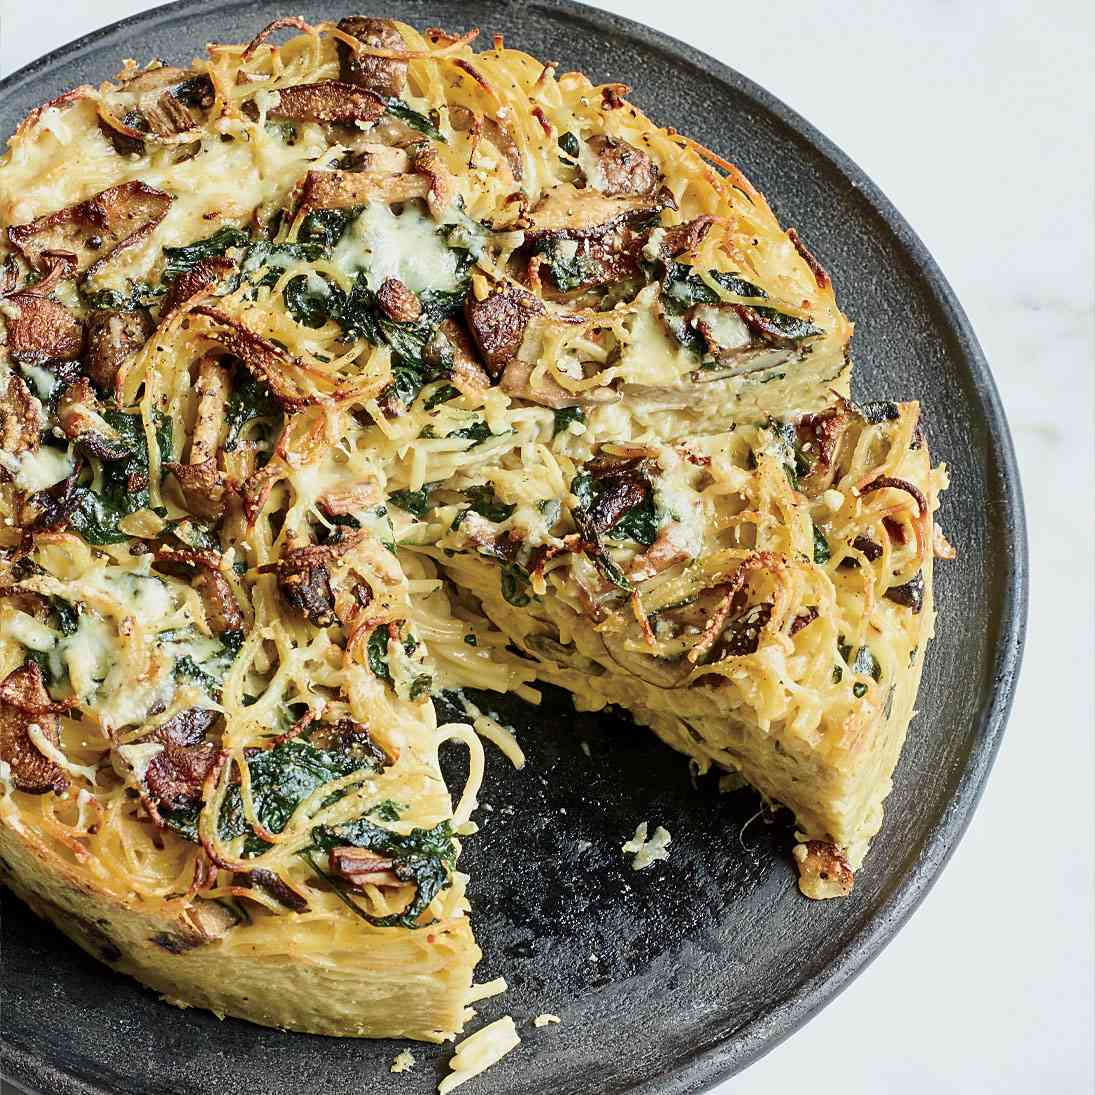 Spaghetti Pie with Wild Mushrooms and Spinach